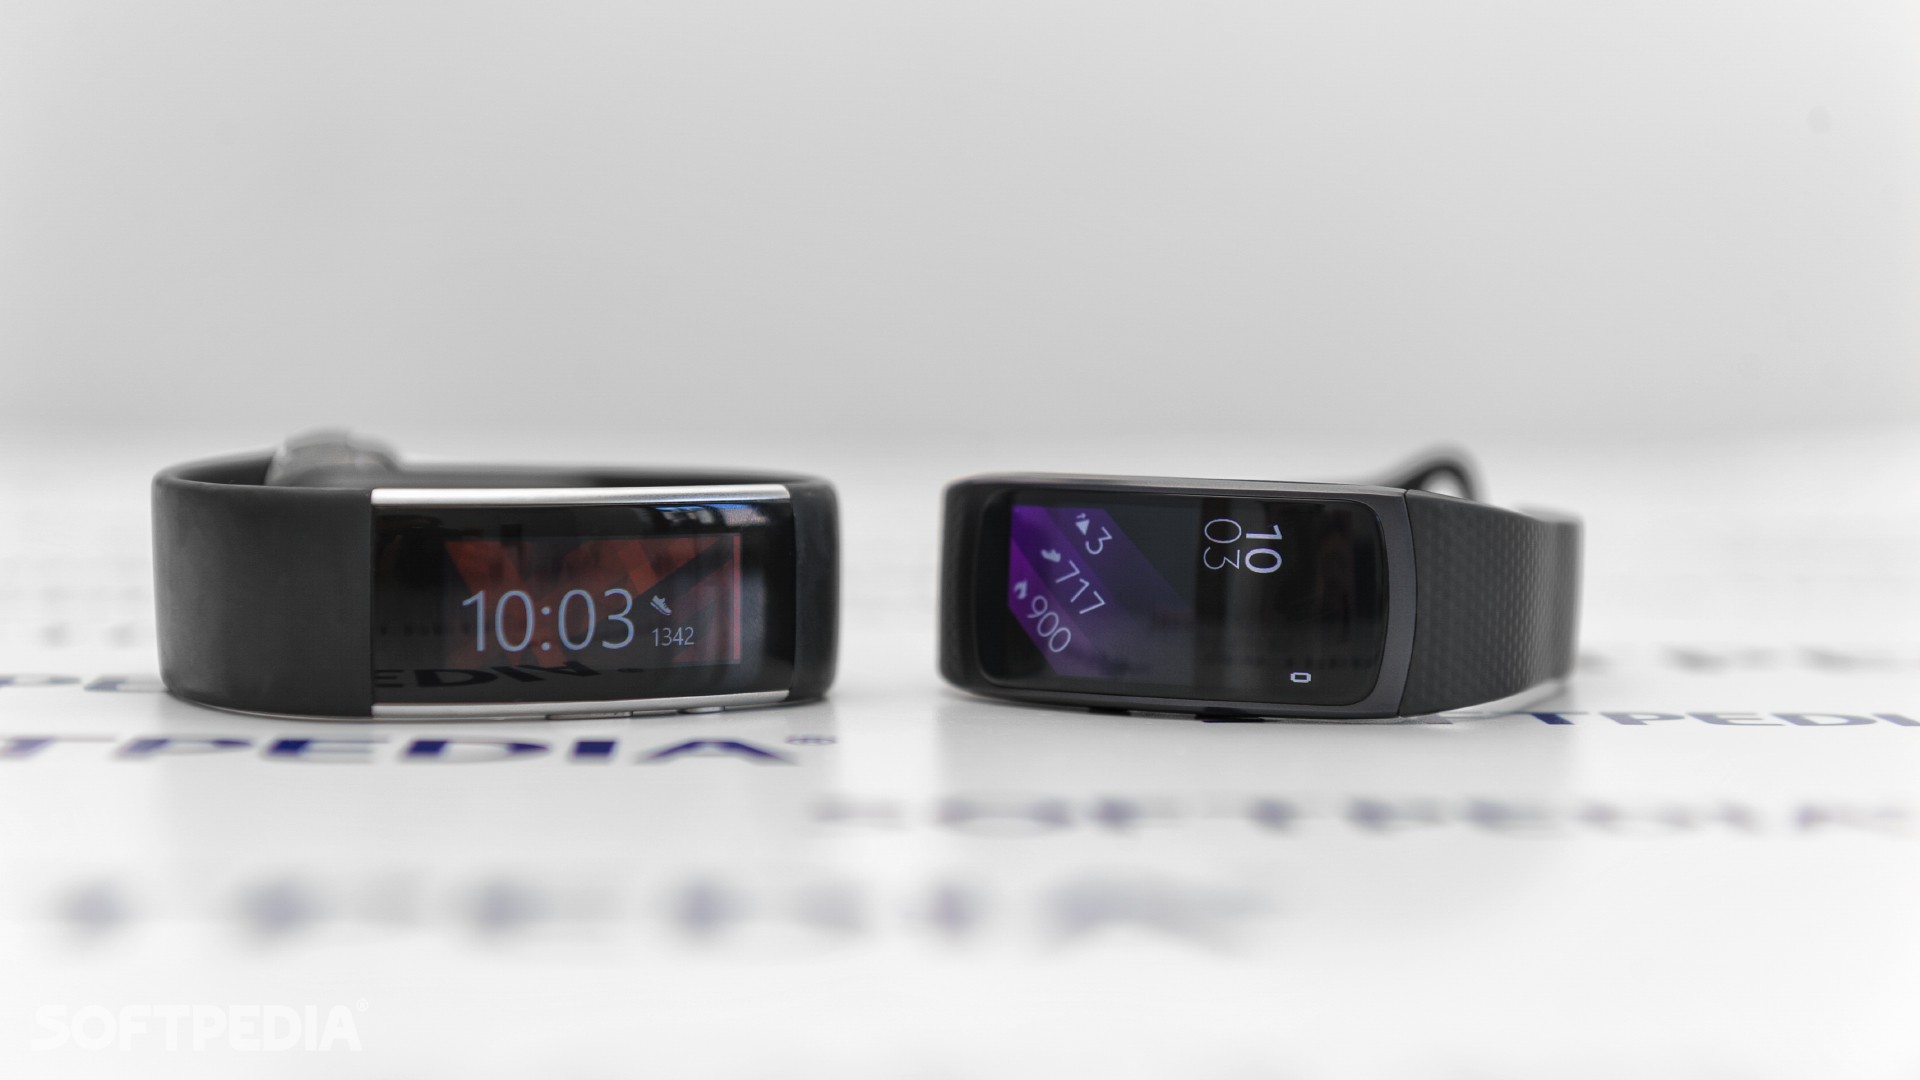 Microsoft Band 2 And Samsung Gear Fit - Samsung Gear Fit 2 Vs Gear Fit , HD Wallpaper & Backgrounds